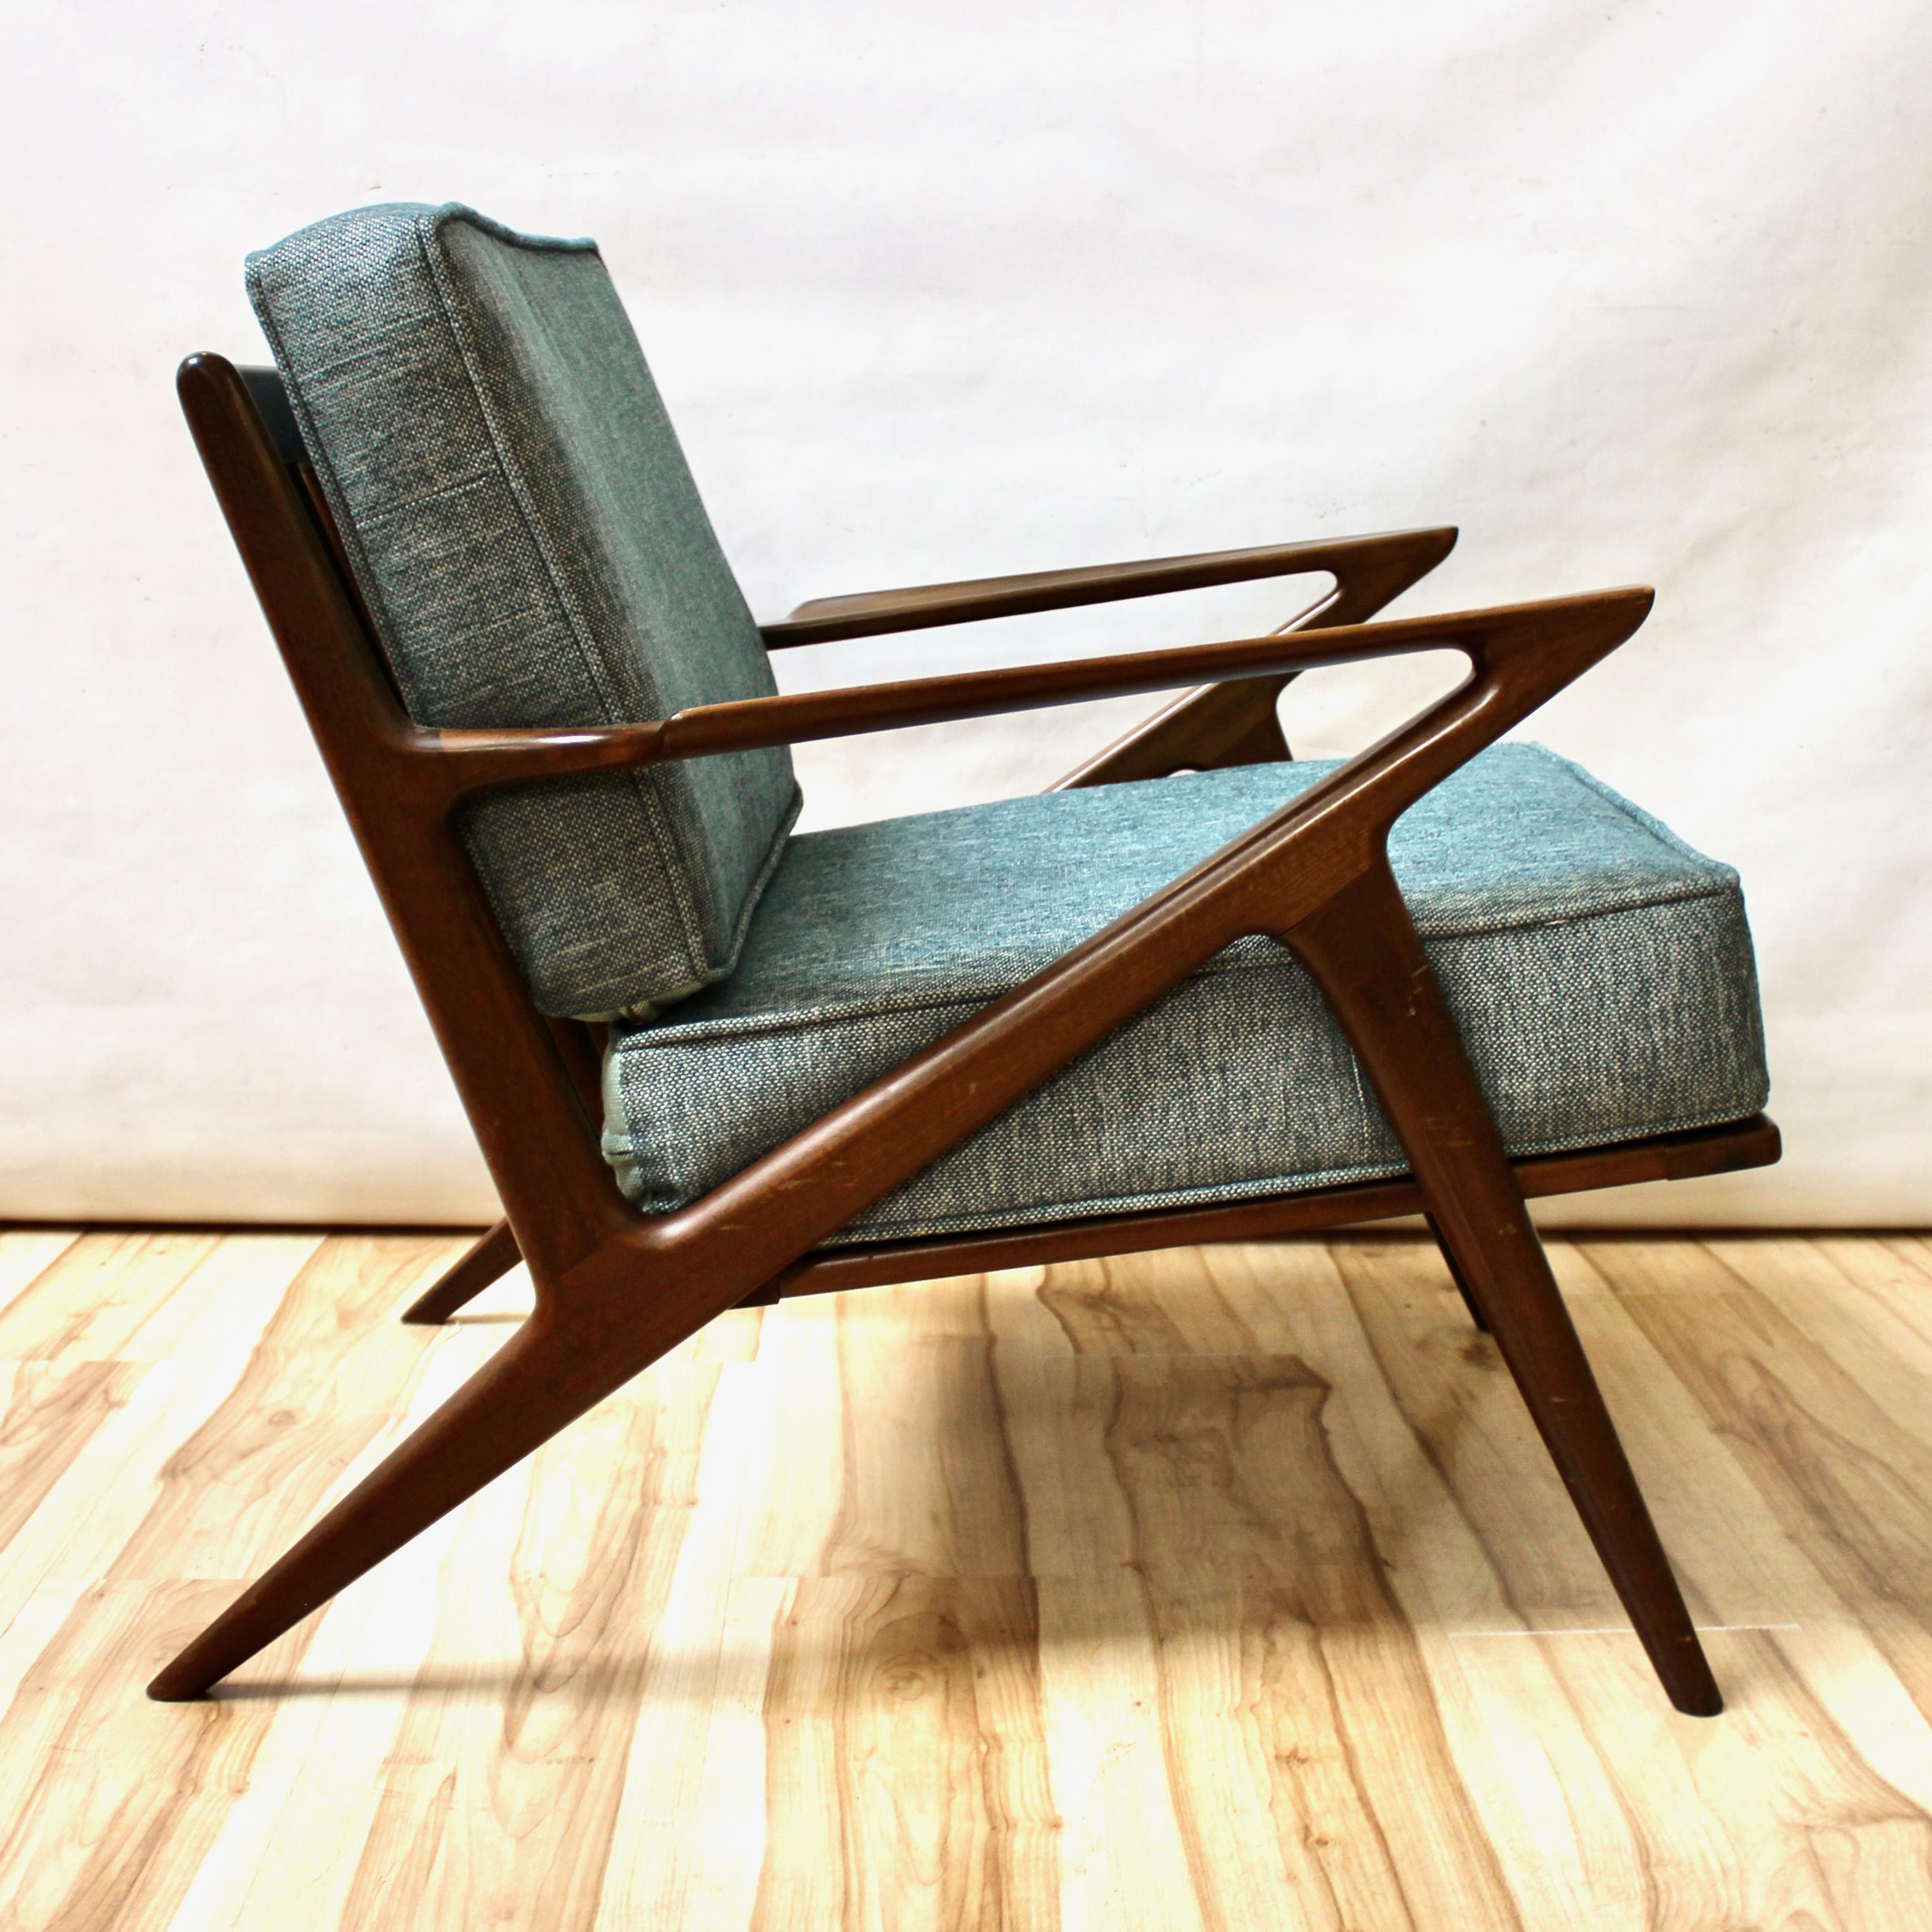 Fabric 1957 Danish Modern Z Lounge Chair by Poul Jensen for Selig